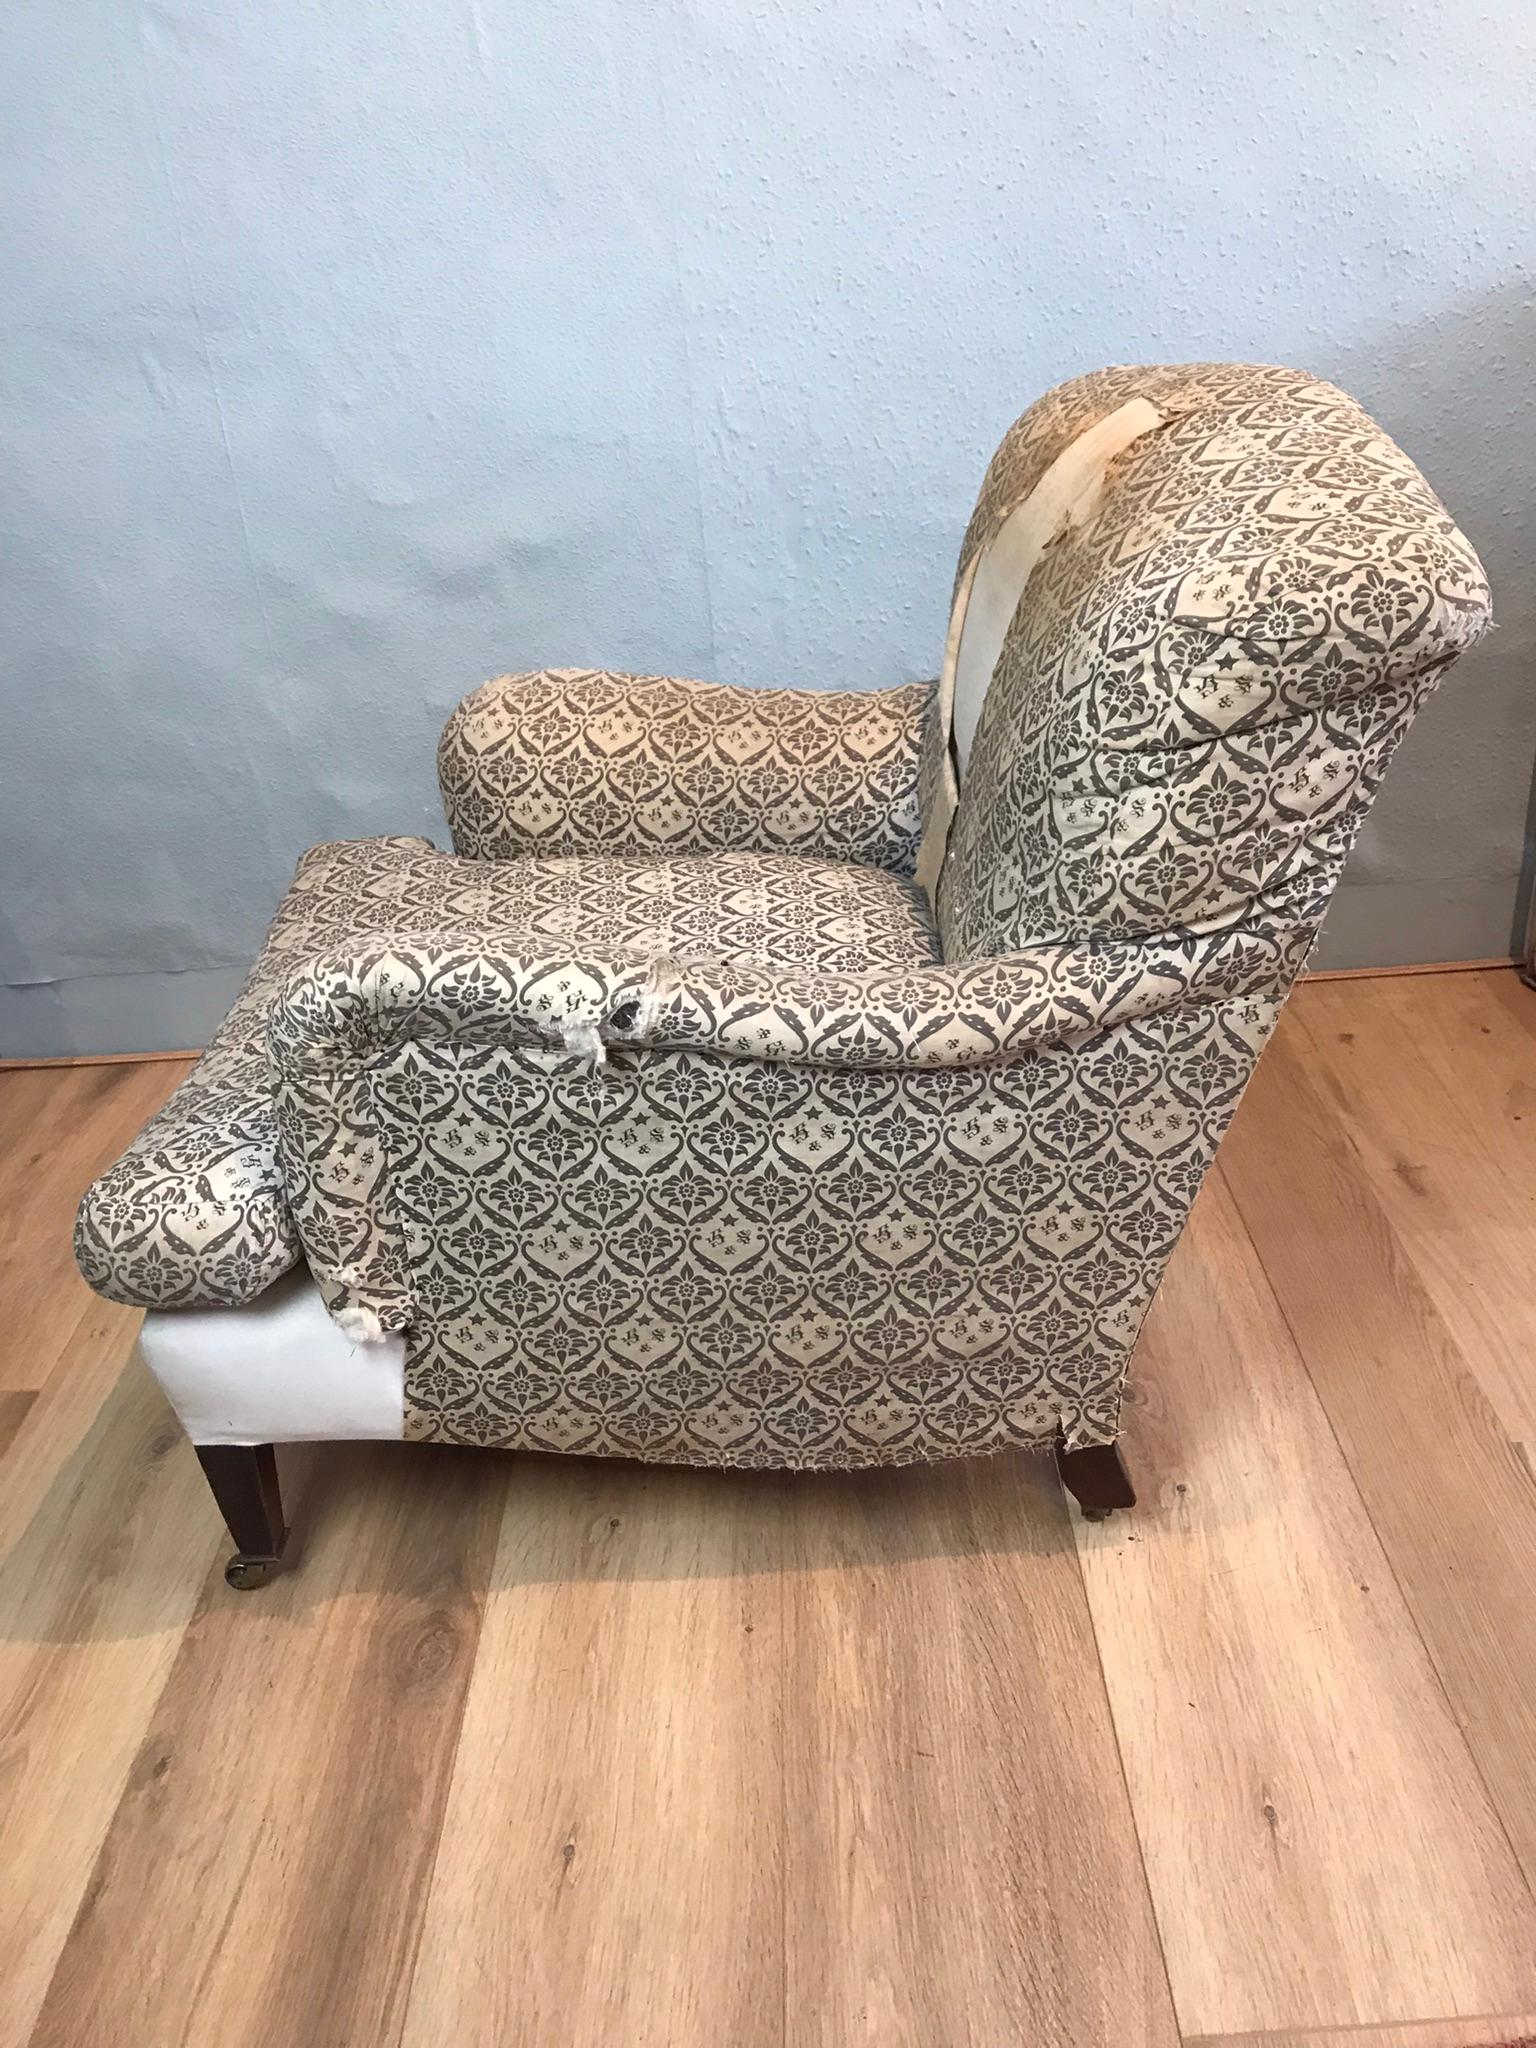 Howard & Sons LTD Bridgewater arm chair retaining It’s original upholstery in H & S monogram ticking, the Bridgewater is one of the most popular models of outstanding quality has what you would expect from Howard and Sons, the rear leg is